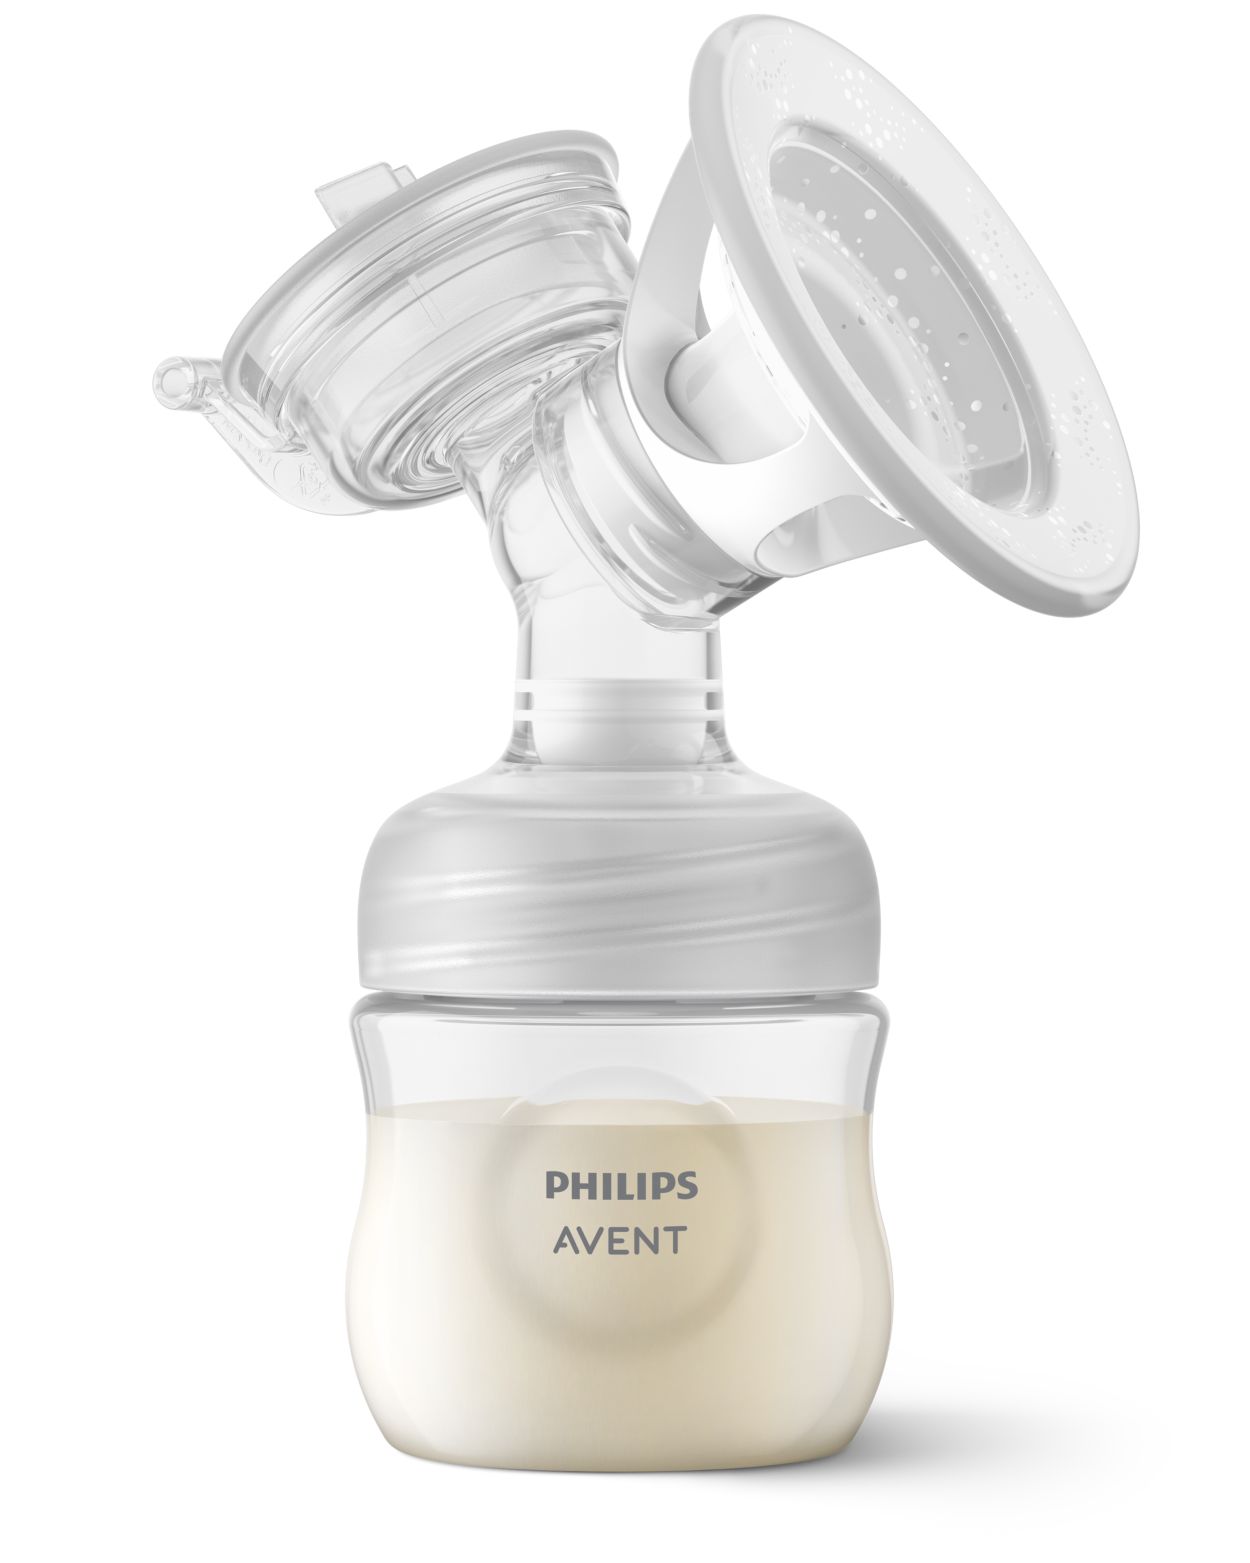 Philips AVENT Single Electronic Breast Pump - Breast pumps